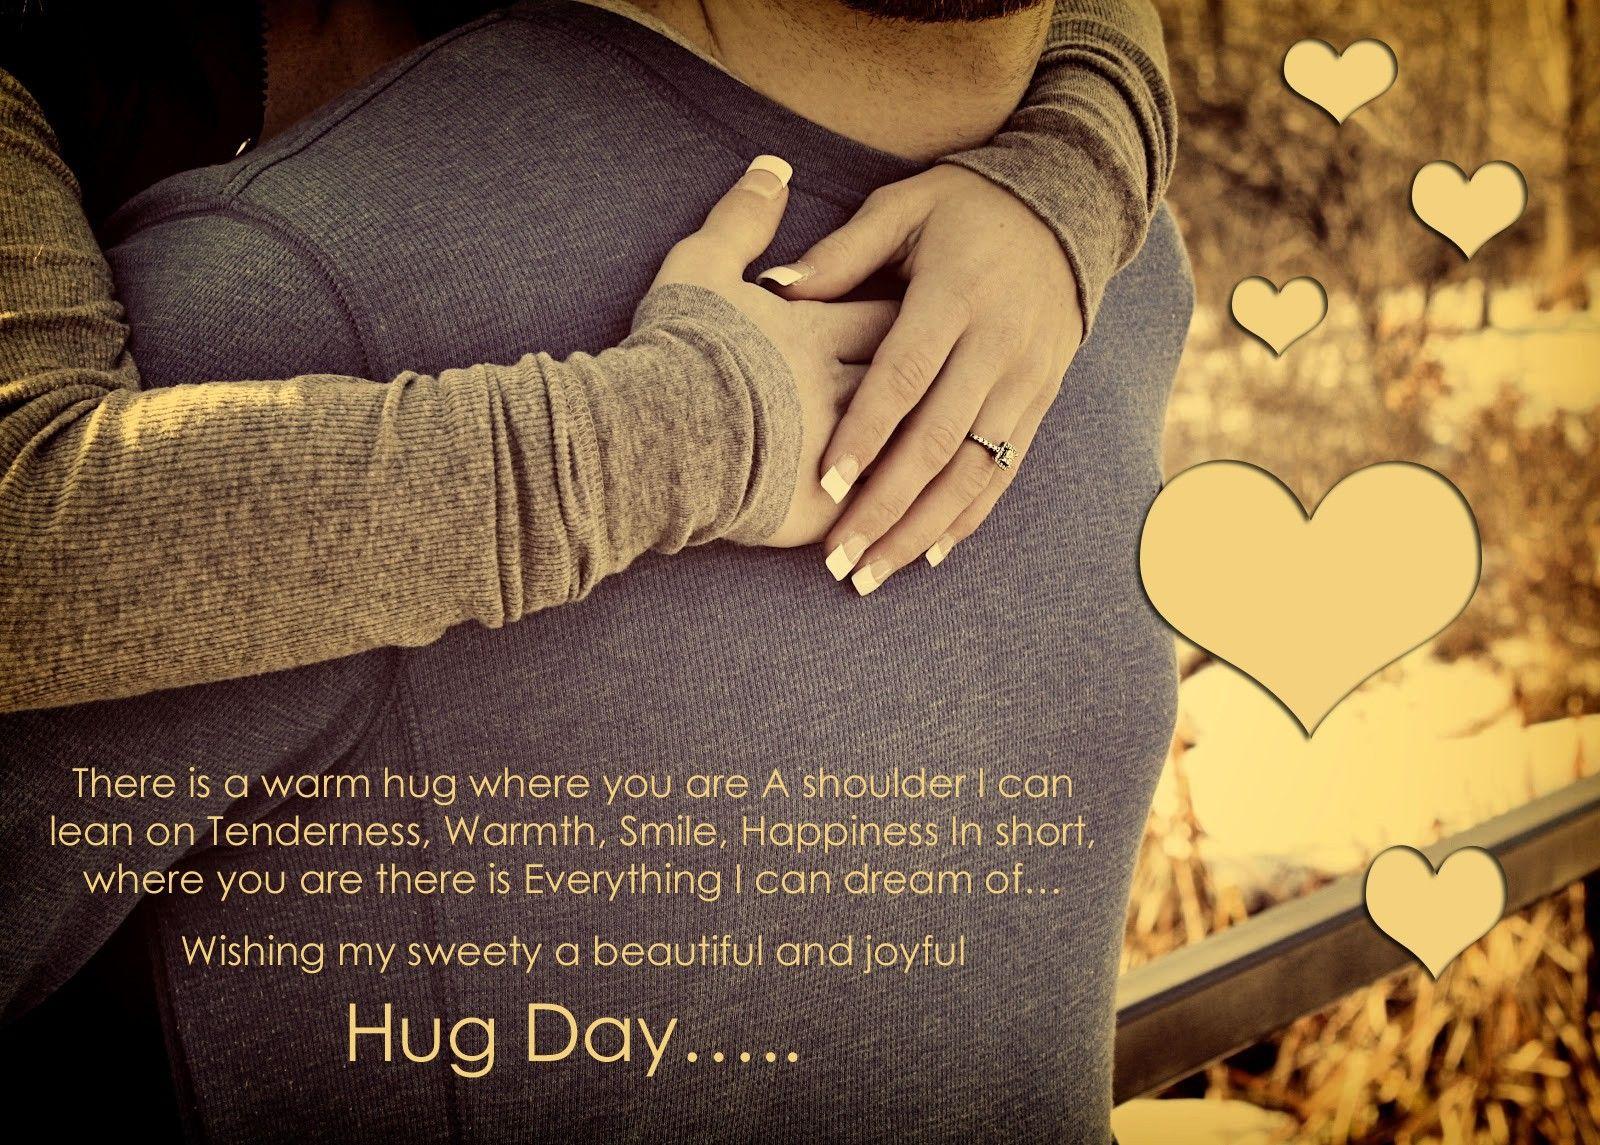 Free Heart Special Image Full HD High Quality Wallpaper Hug Day